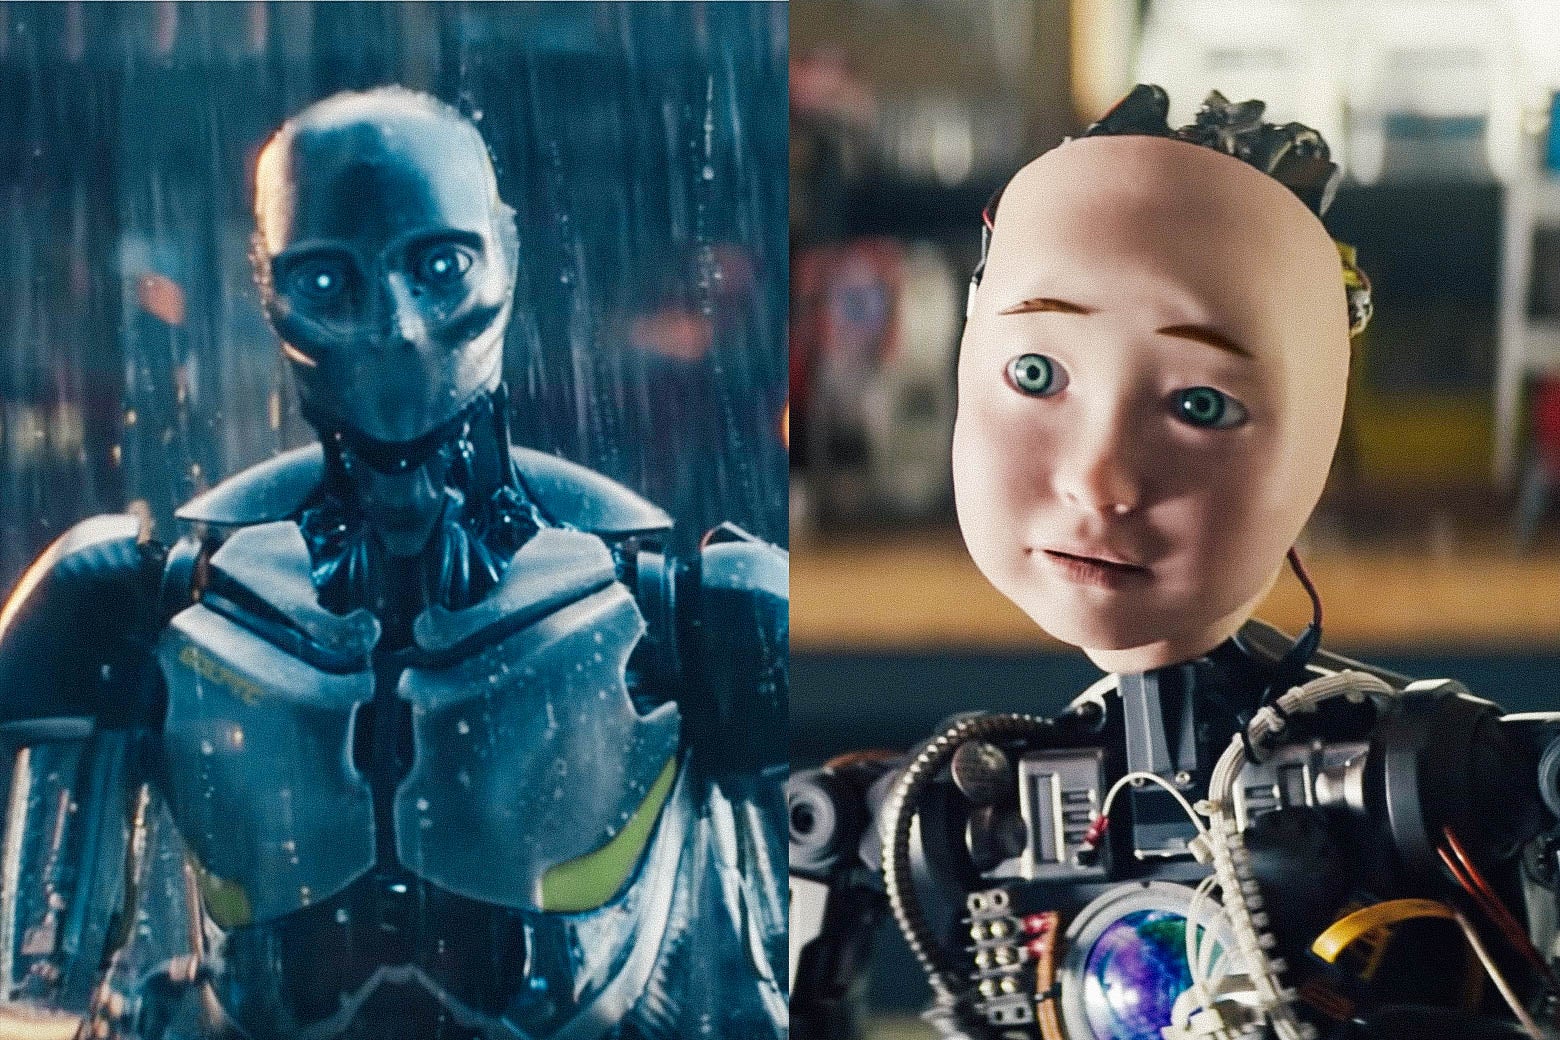 Left: Michelob’s ad robot. Right: Intuit’s ad robot.